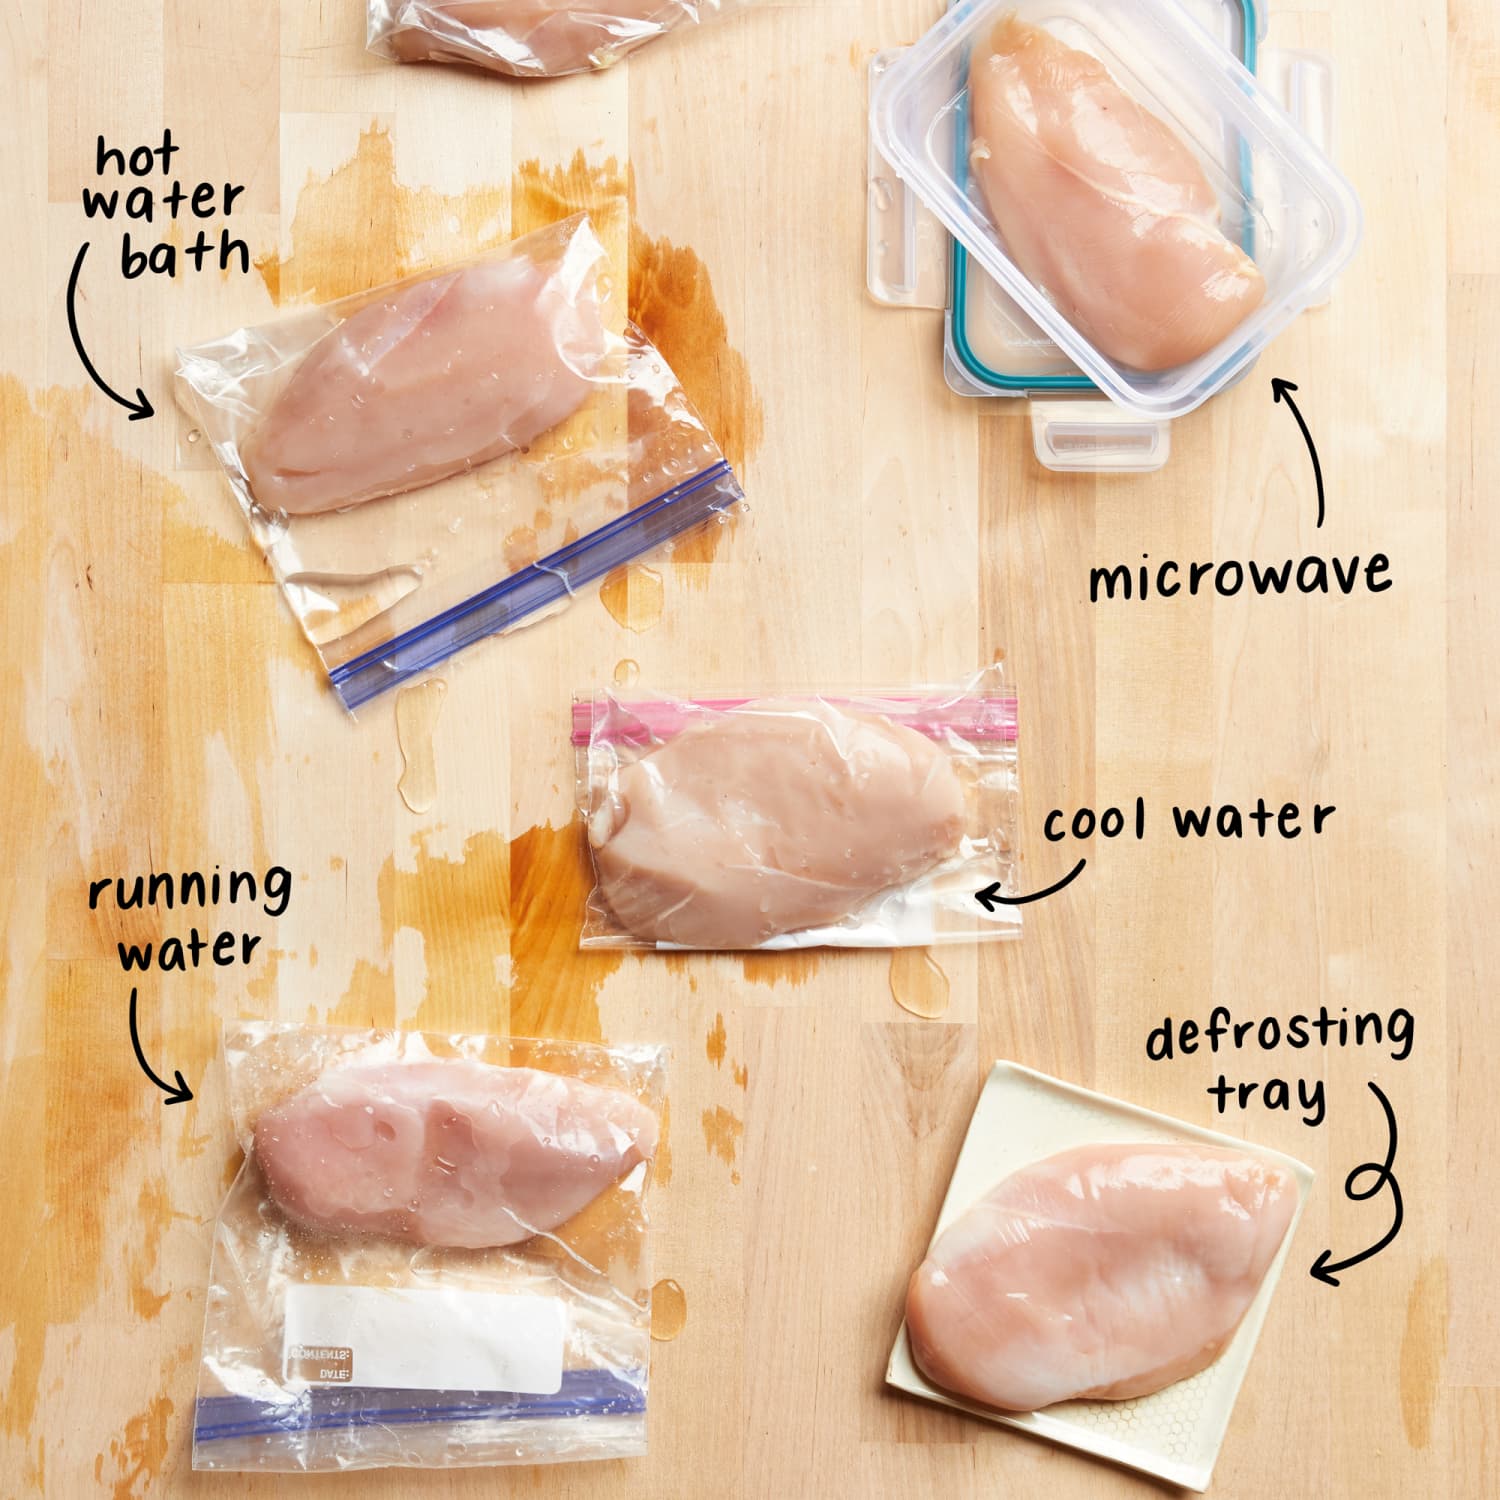 We Tried 6 Methods for Defrosting Chicken and Found the Quickest and Easiest Way | Kitchn